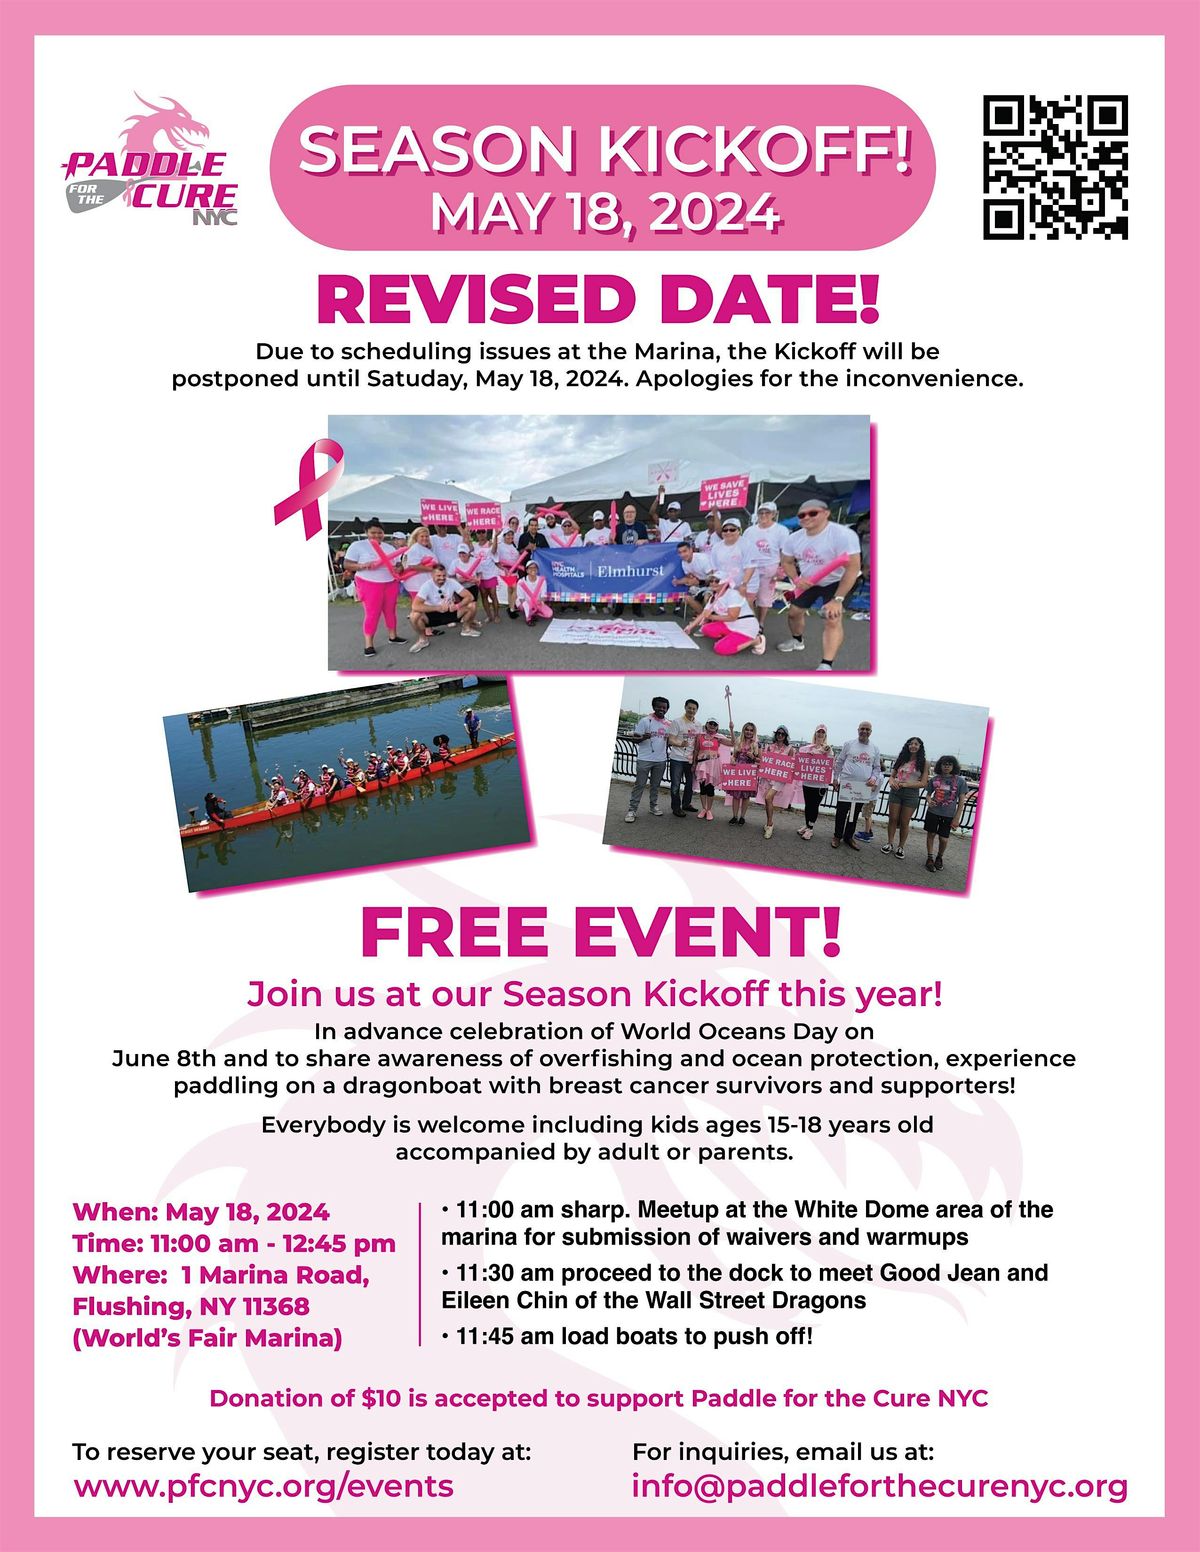 Paddle For the Cure Season Kickoff!